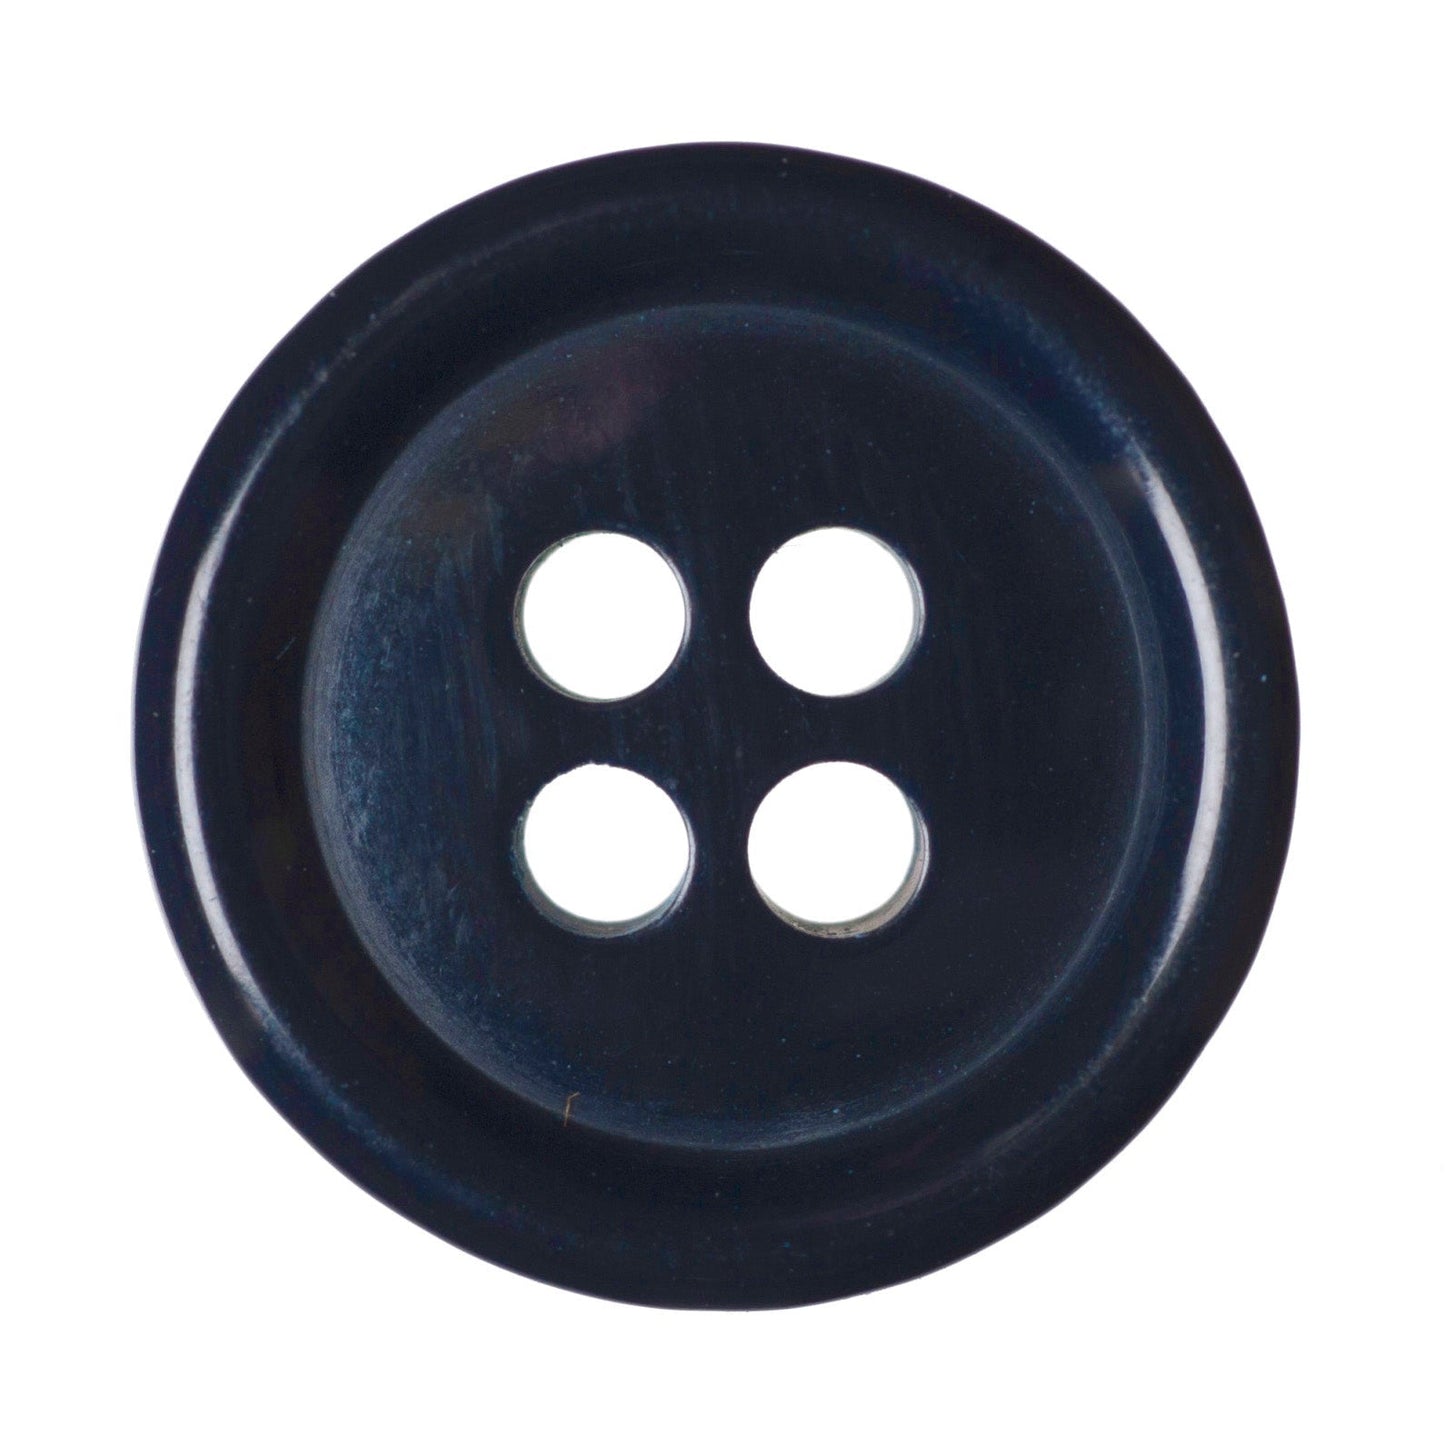 4 Hole Solid Jacket Button - 23mm - Navy